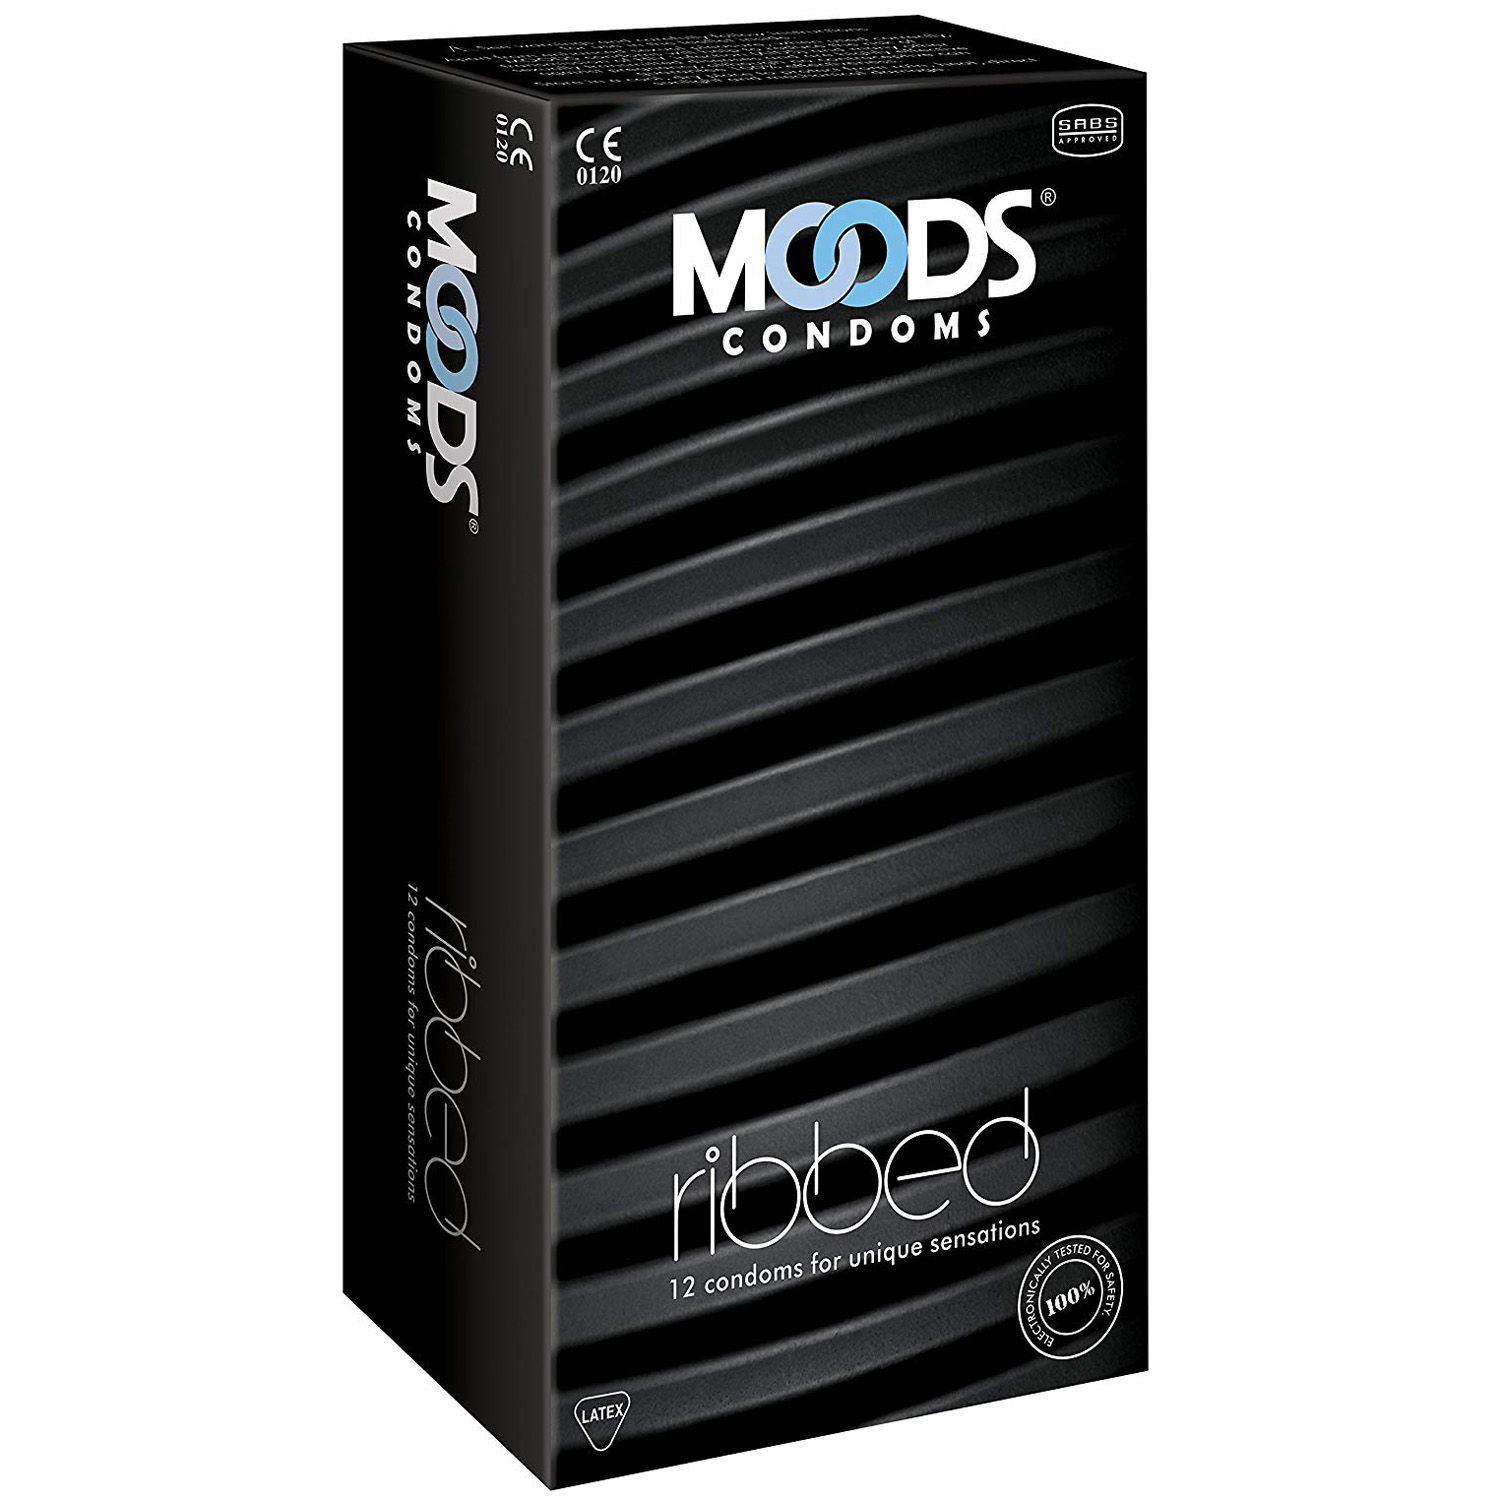 Buy Moods Ribbed Condoms, 12 Count Online